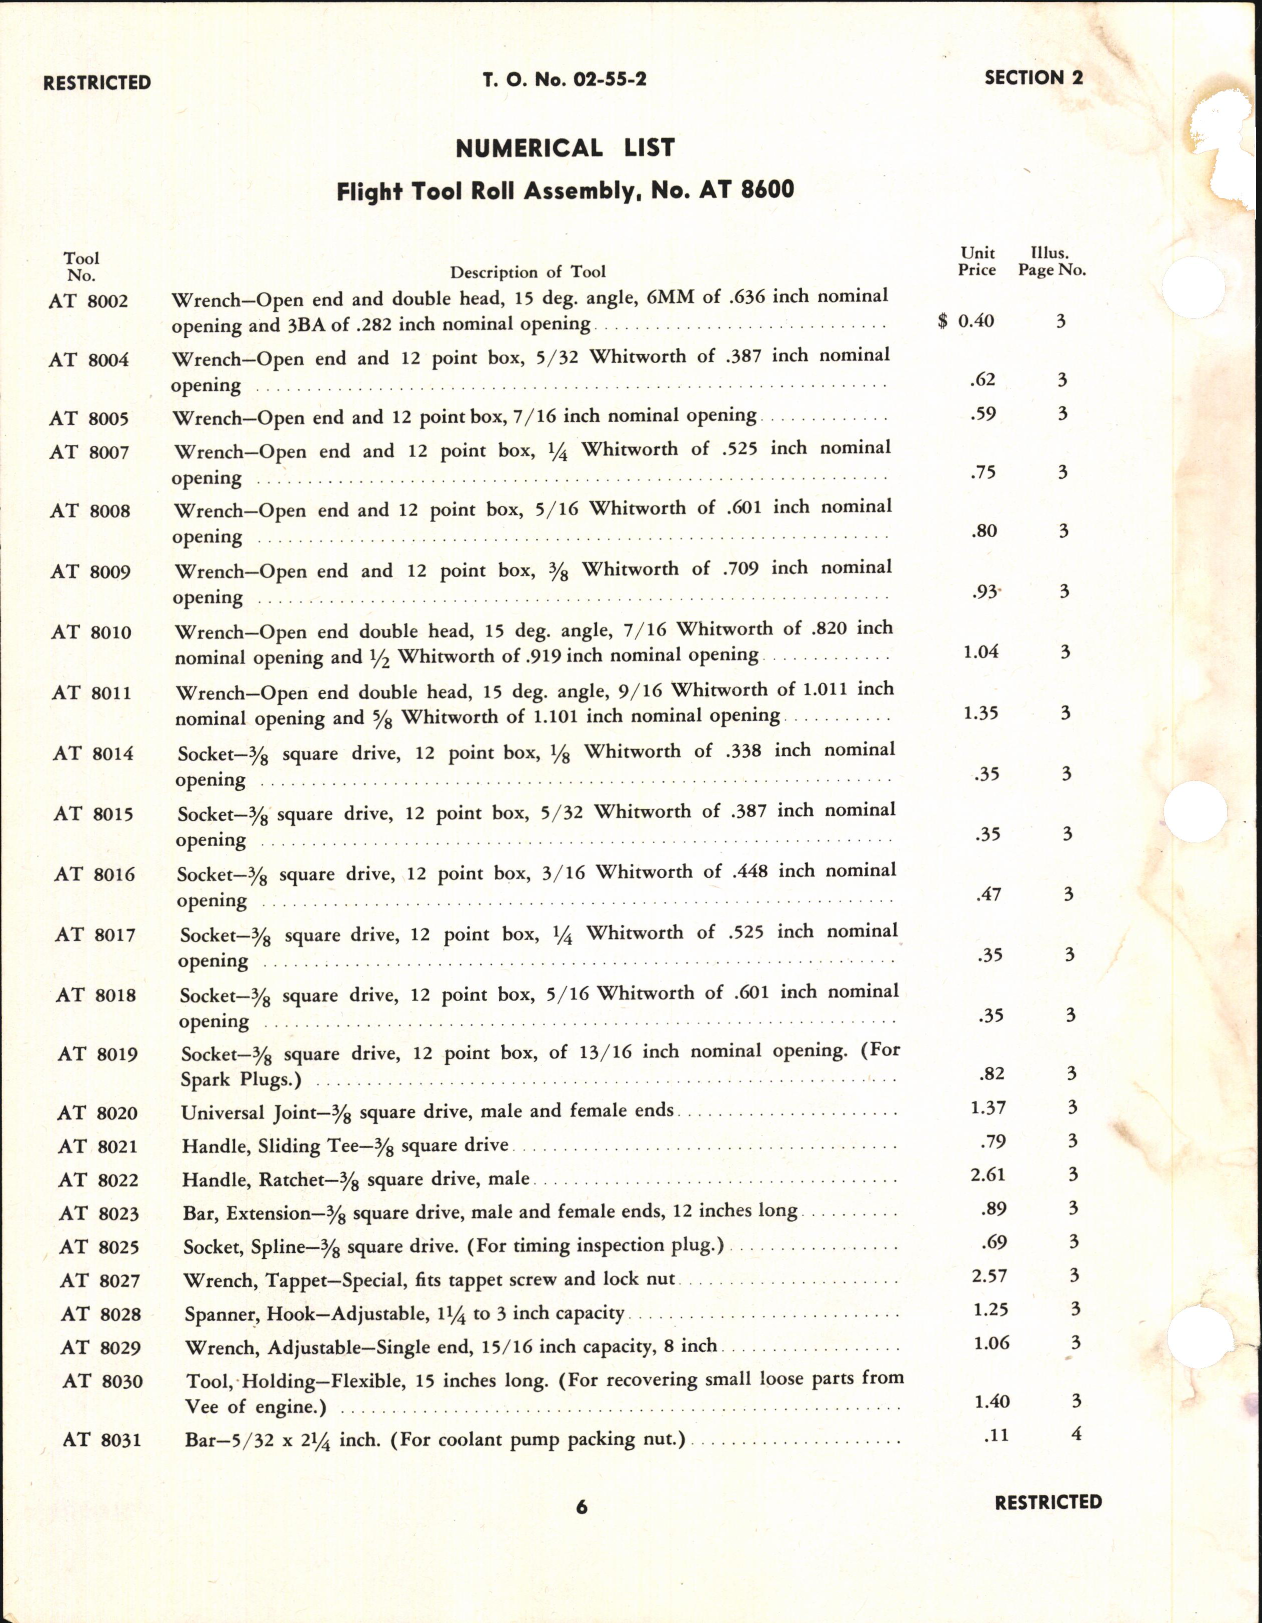 Sample page 8 from AirCorps Library document: Service Tool Catalog for Rolls-Royce Aircraft Engines